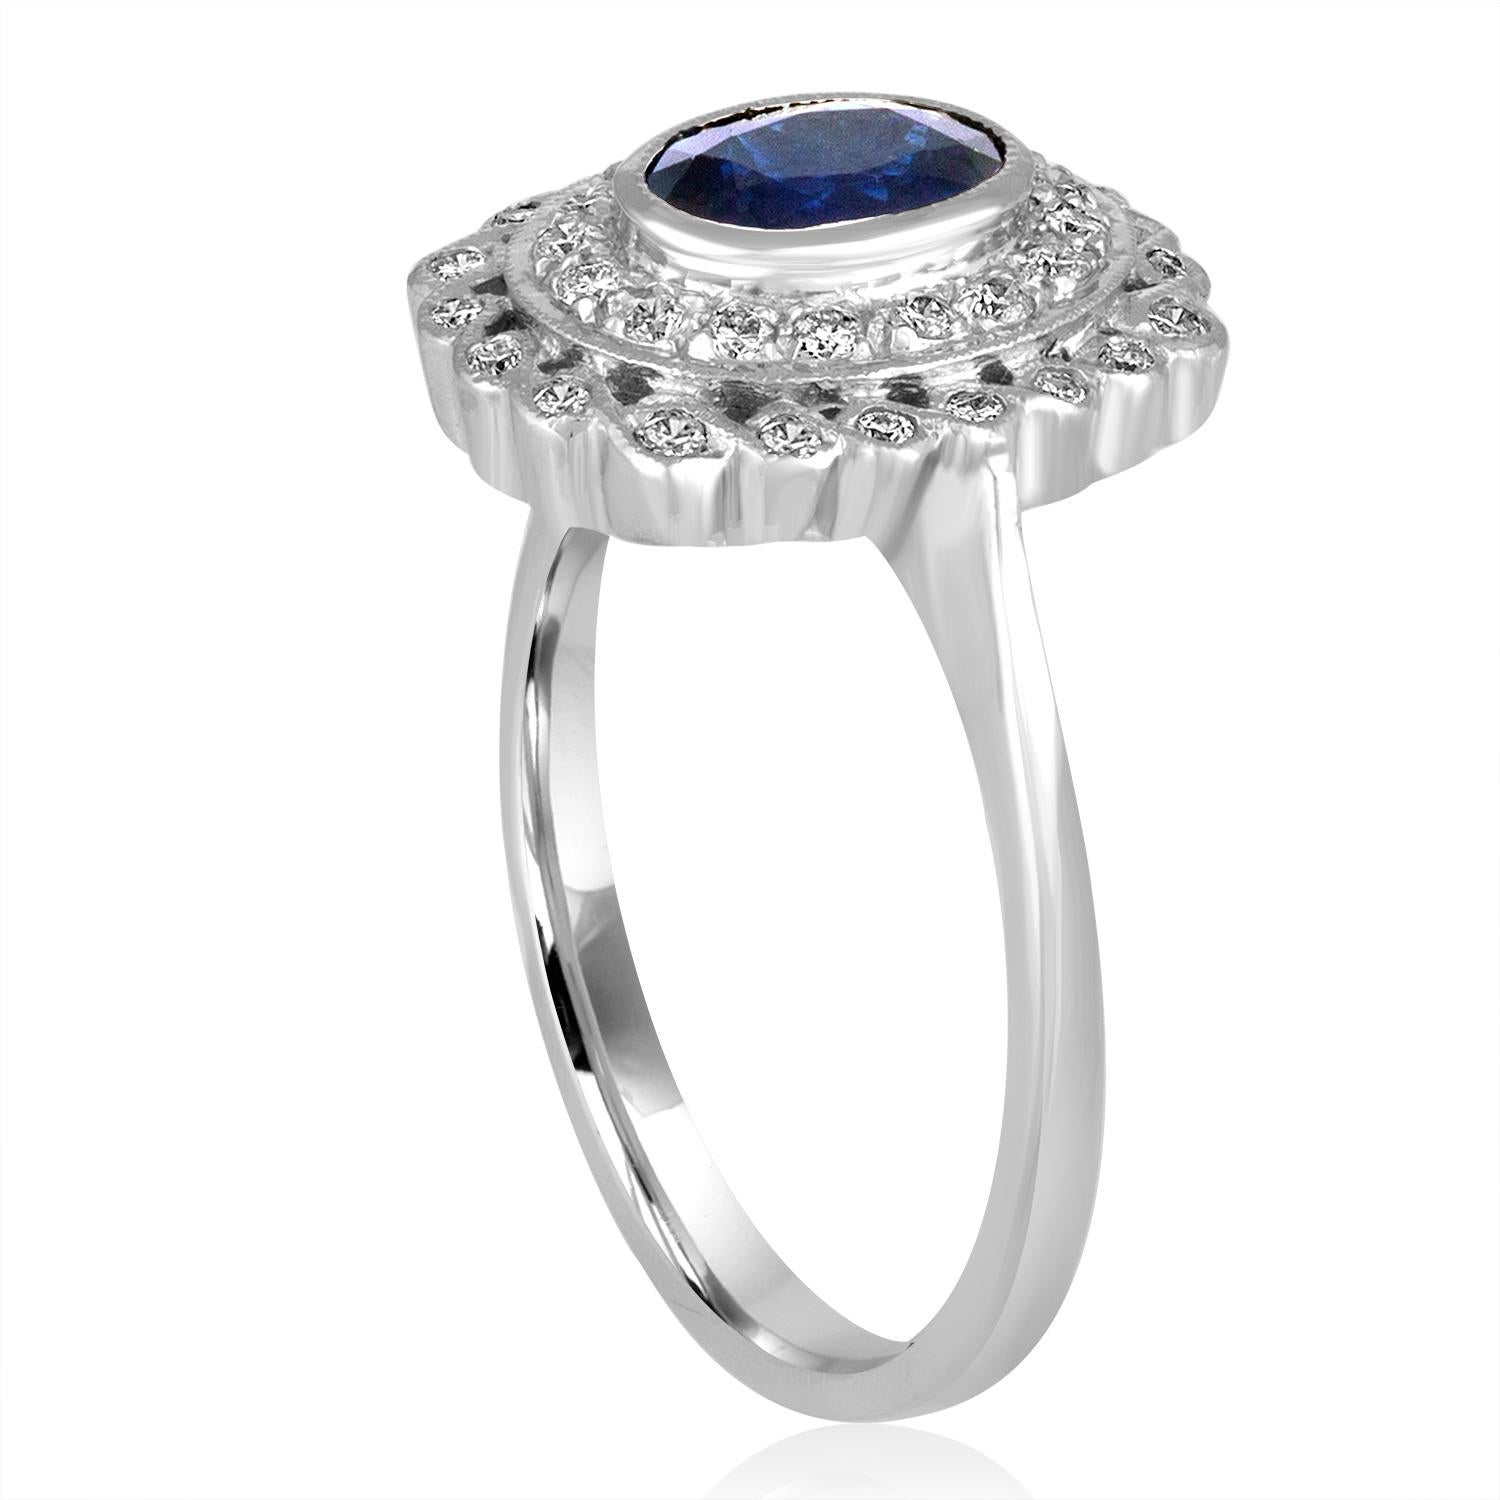 Art Deco Revival Style Ring.
The ring is 18K White Gold
There are 0.50 Carats in Diamonds H SI
The center stone is an oval blue sapphire 0.76 Carats
The ring is a size 6.75, sizable.
The ring measures 0.50